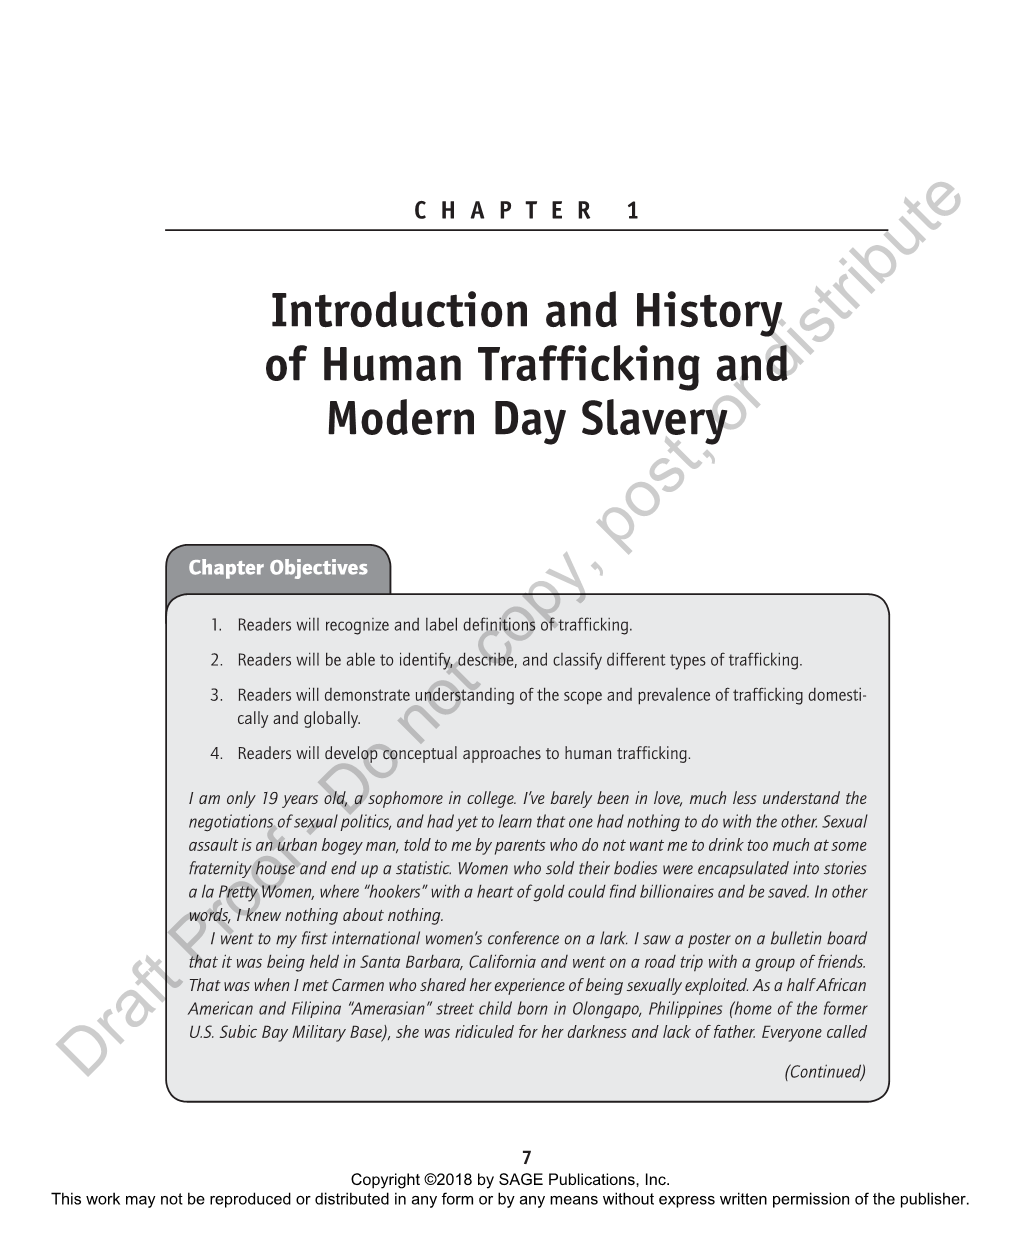 Introduction and History of Human Trafficking and Modern Day Slavery